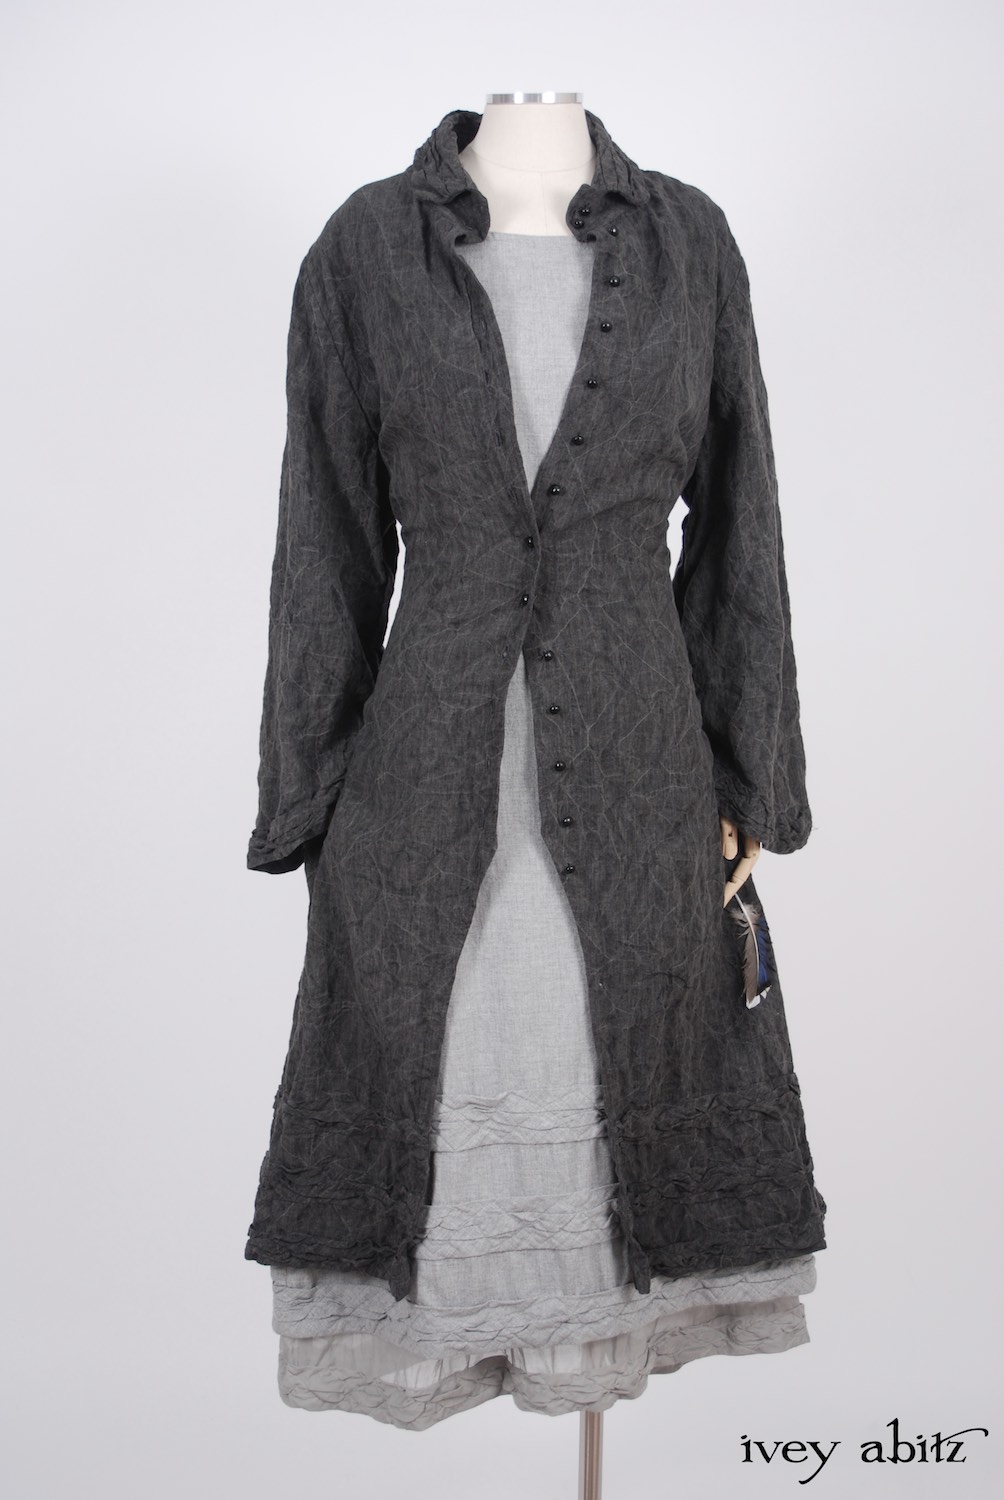 Ivey Abitz - Bartholomew Duster Coat in Sparrow Grey Antiqued Linen  - Tollie Frock in Sparrow Grey Softest Cotton Twill, High Water Length  - Tollie Frock in Sparrow Grey Wispy Silk Voile, Low Water Length